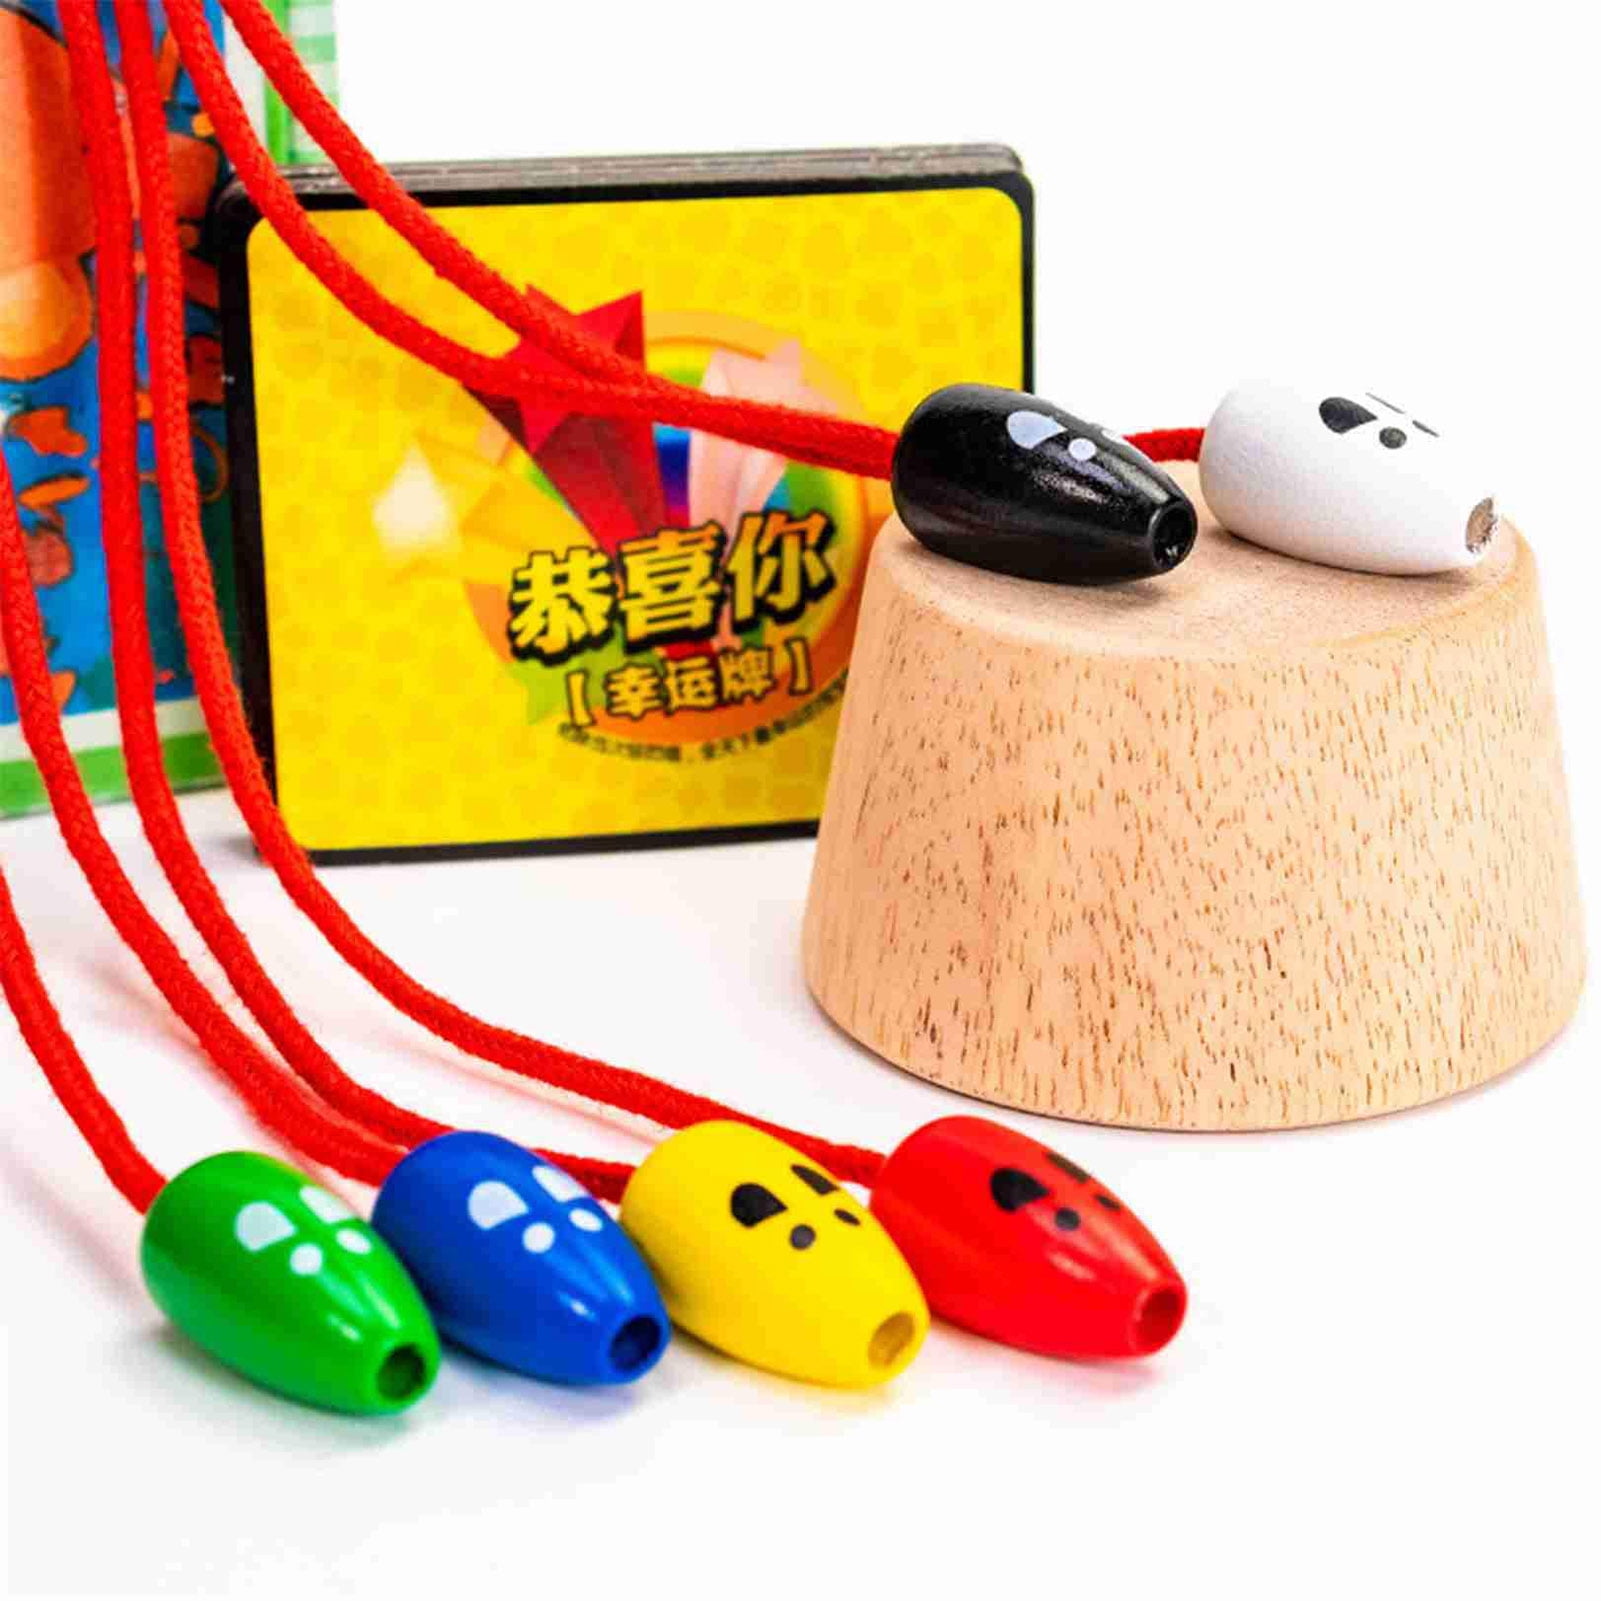 Details about   Wooden Mouse Catching Game Innovative Children Interactive Toy 